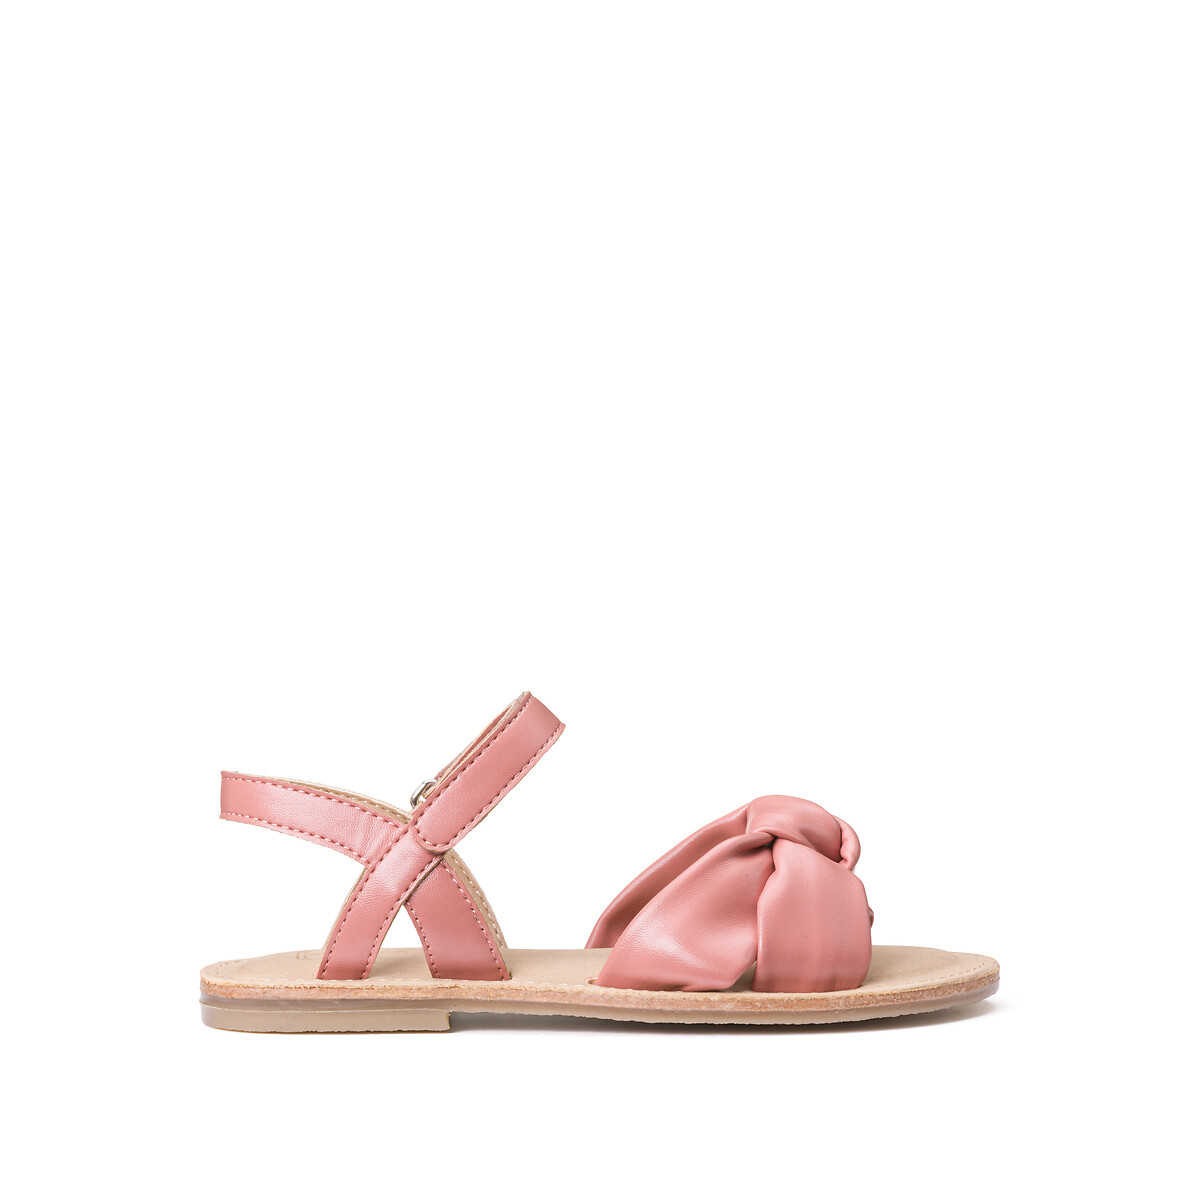 Kids Flat Sandals with Touch ’n’ Close Fastening